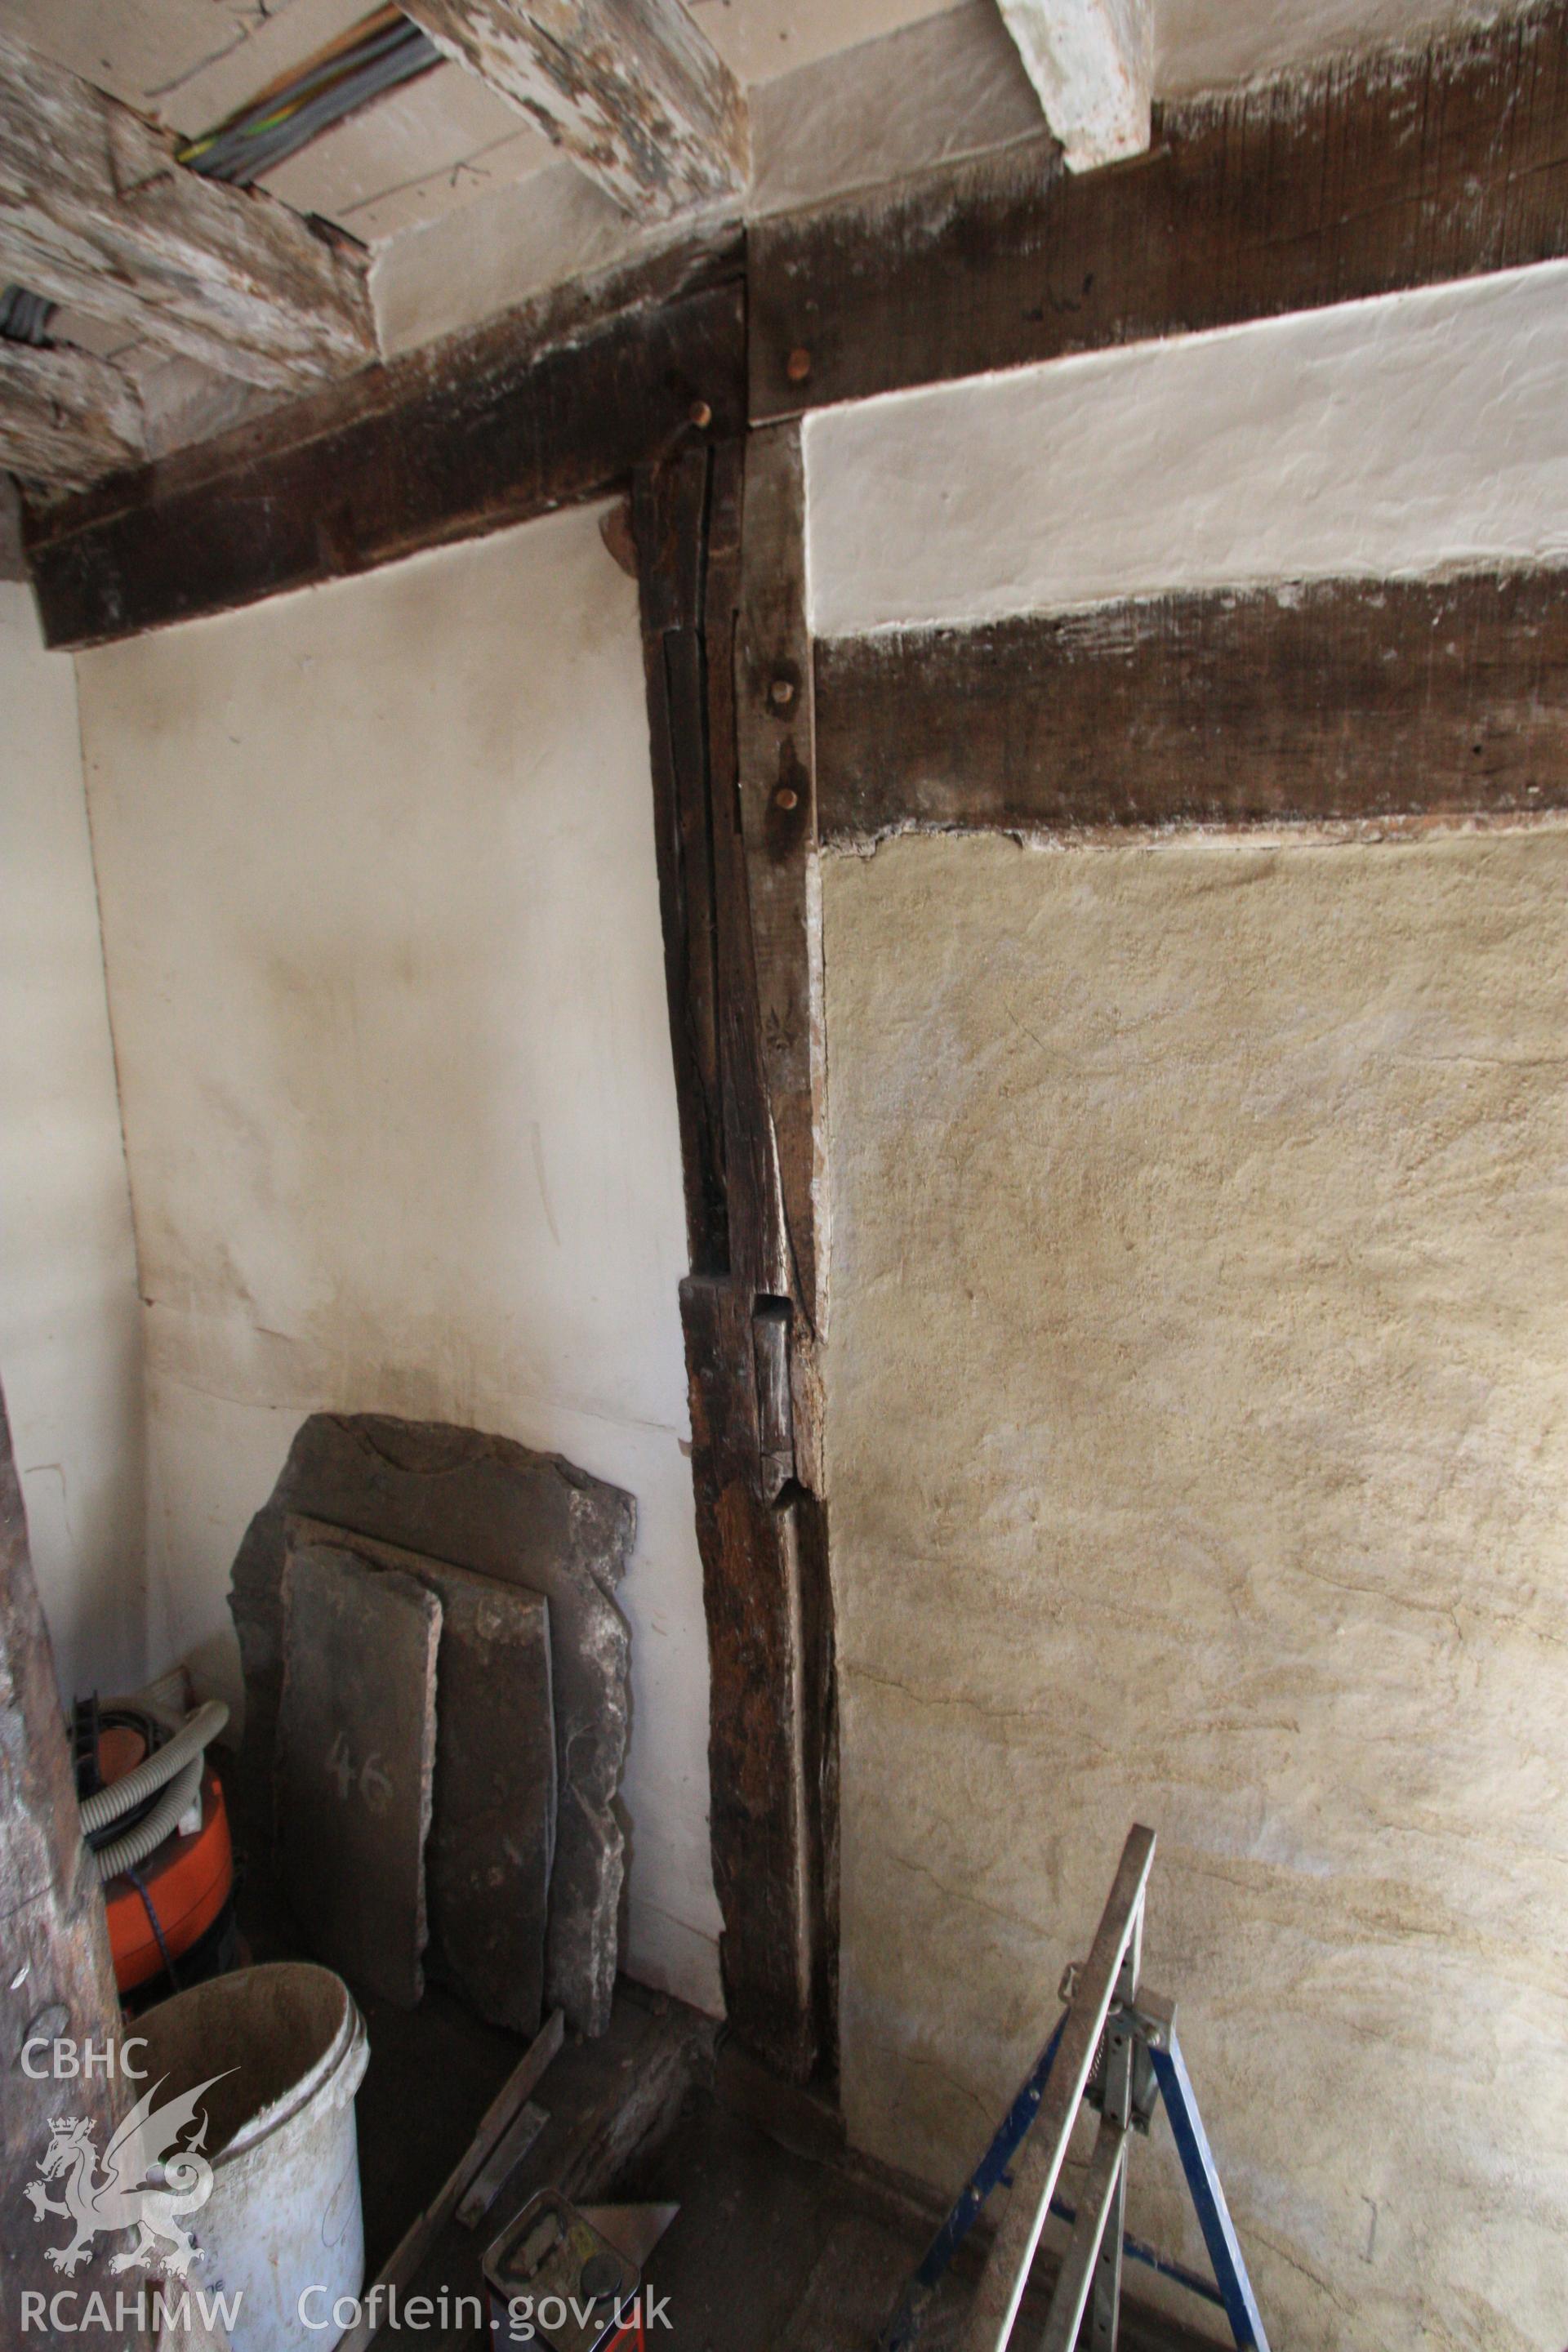 Colour photograph showing interior view of timber frame and plastered wall at Porth-y-Dwr, 67 Clwyd Street, Ruthin. Photographed during survey conducted by Geoff Ward on 10th June 2013.